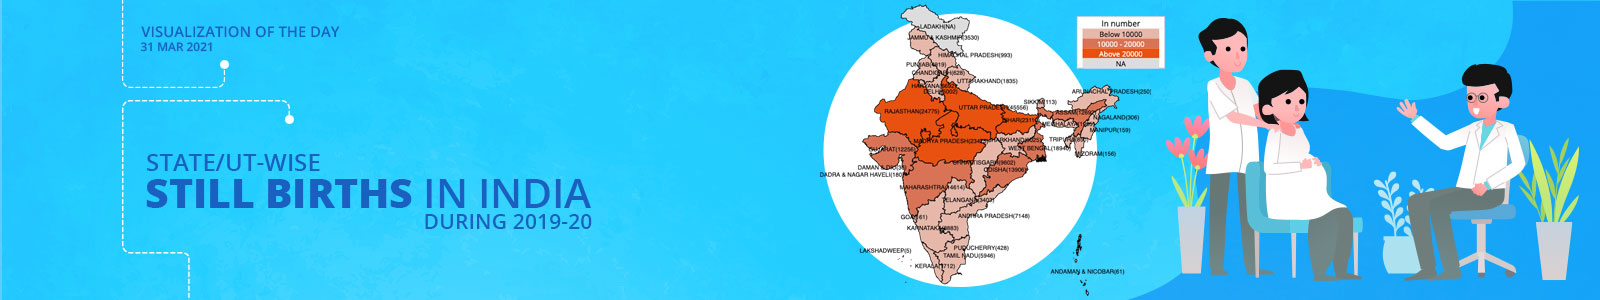 State/UT-wise Still Births in India during 2019-20